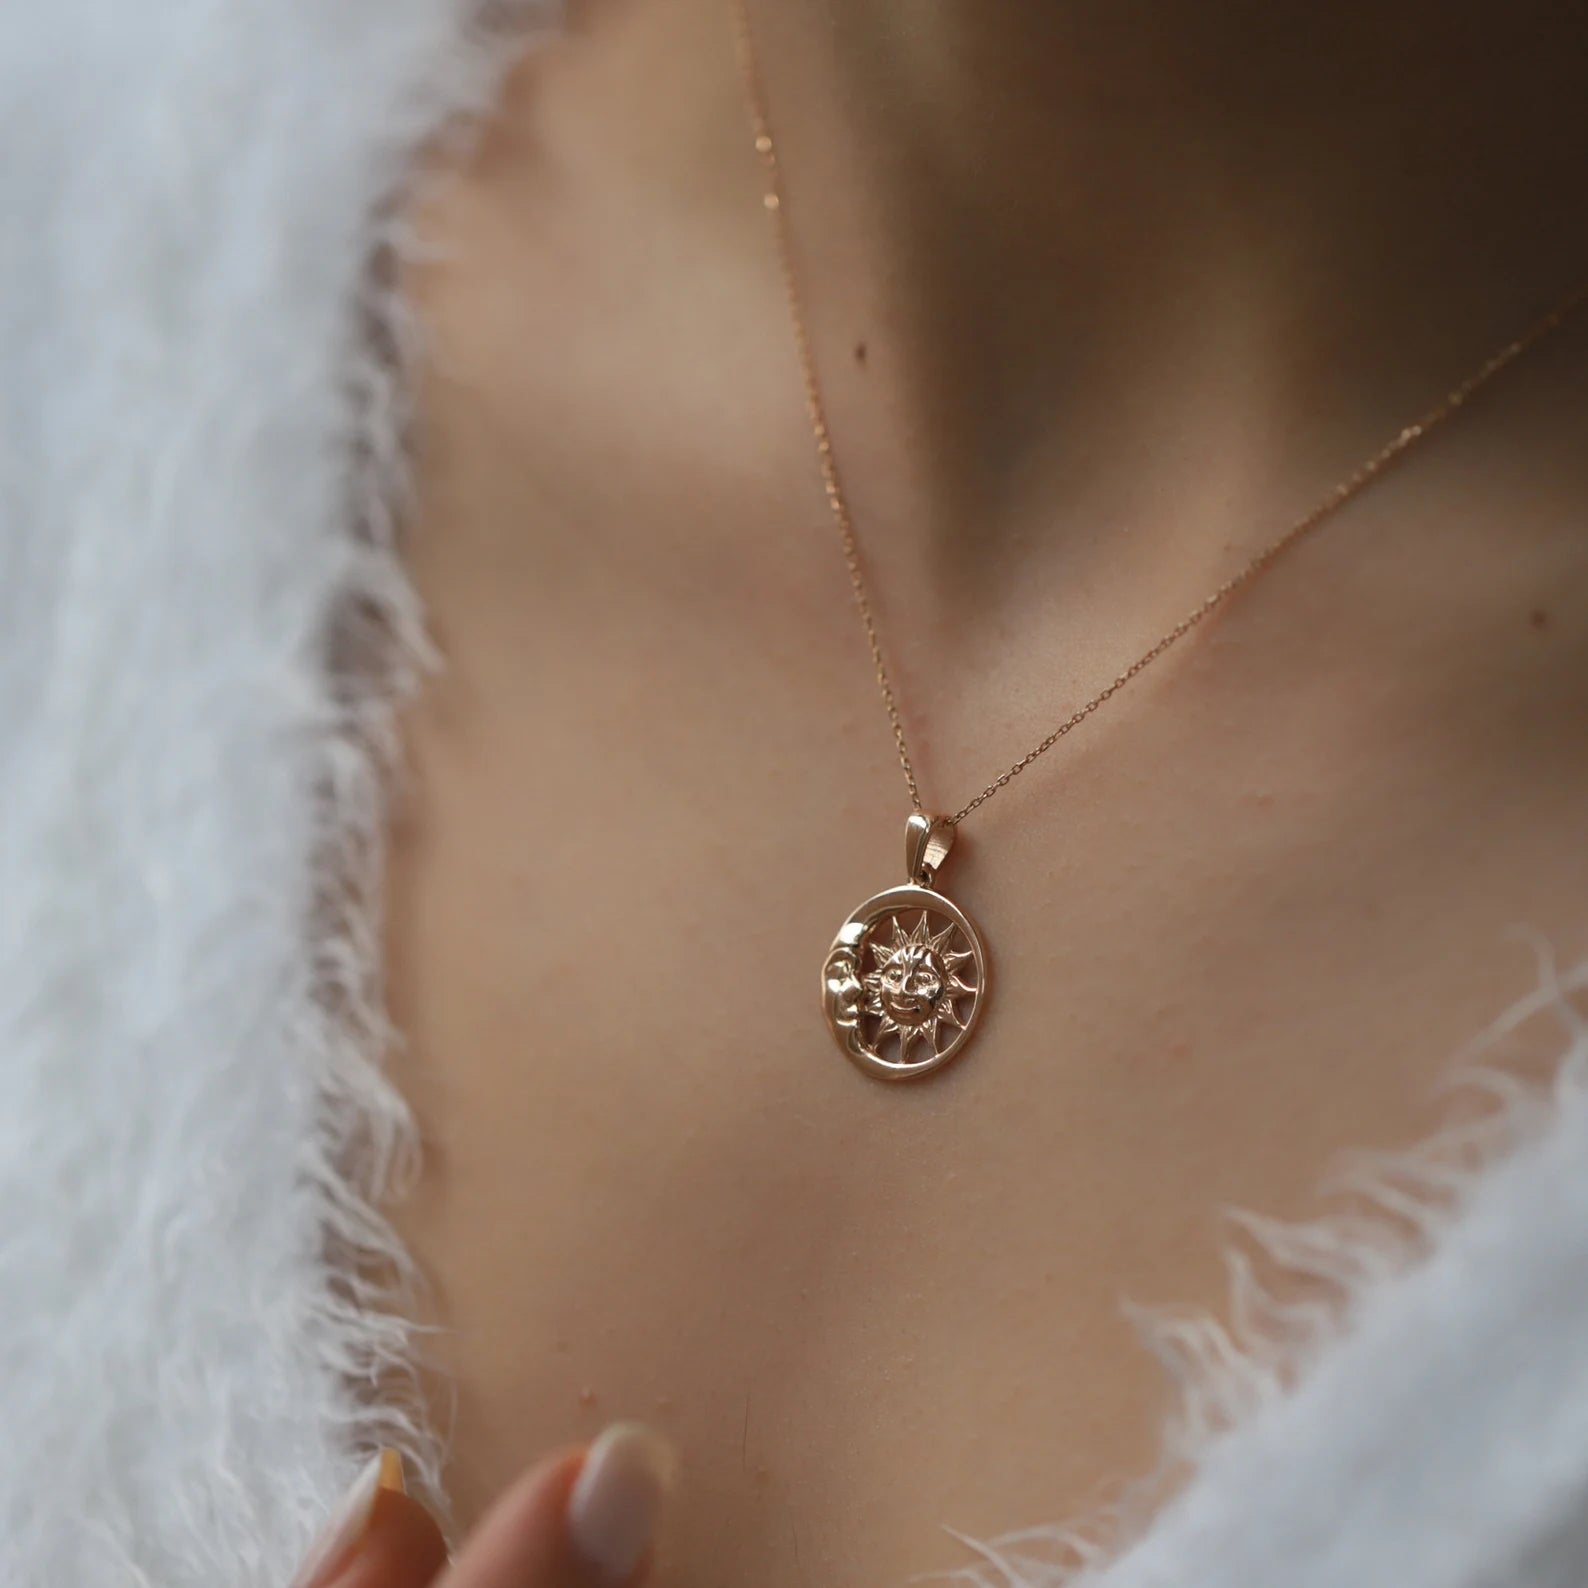 Moon Sun In Circle Necklace